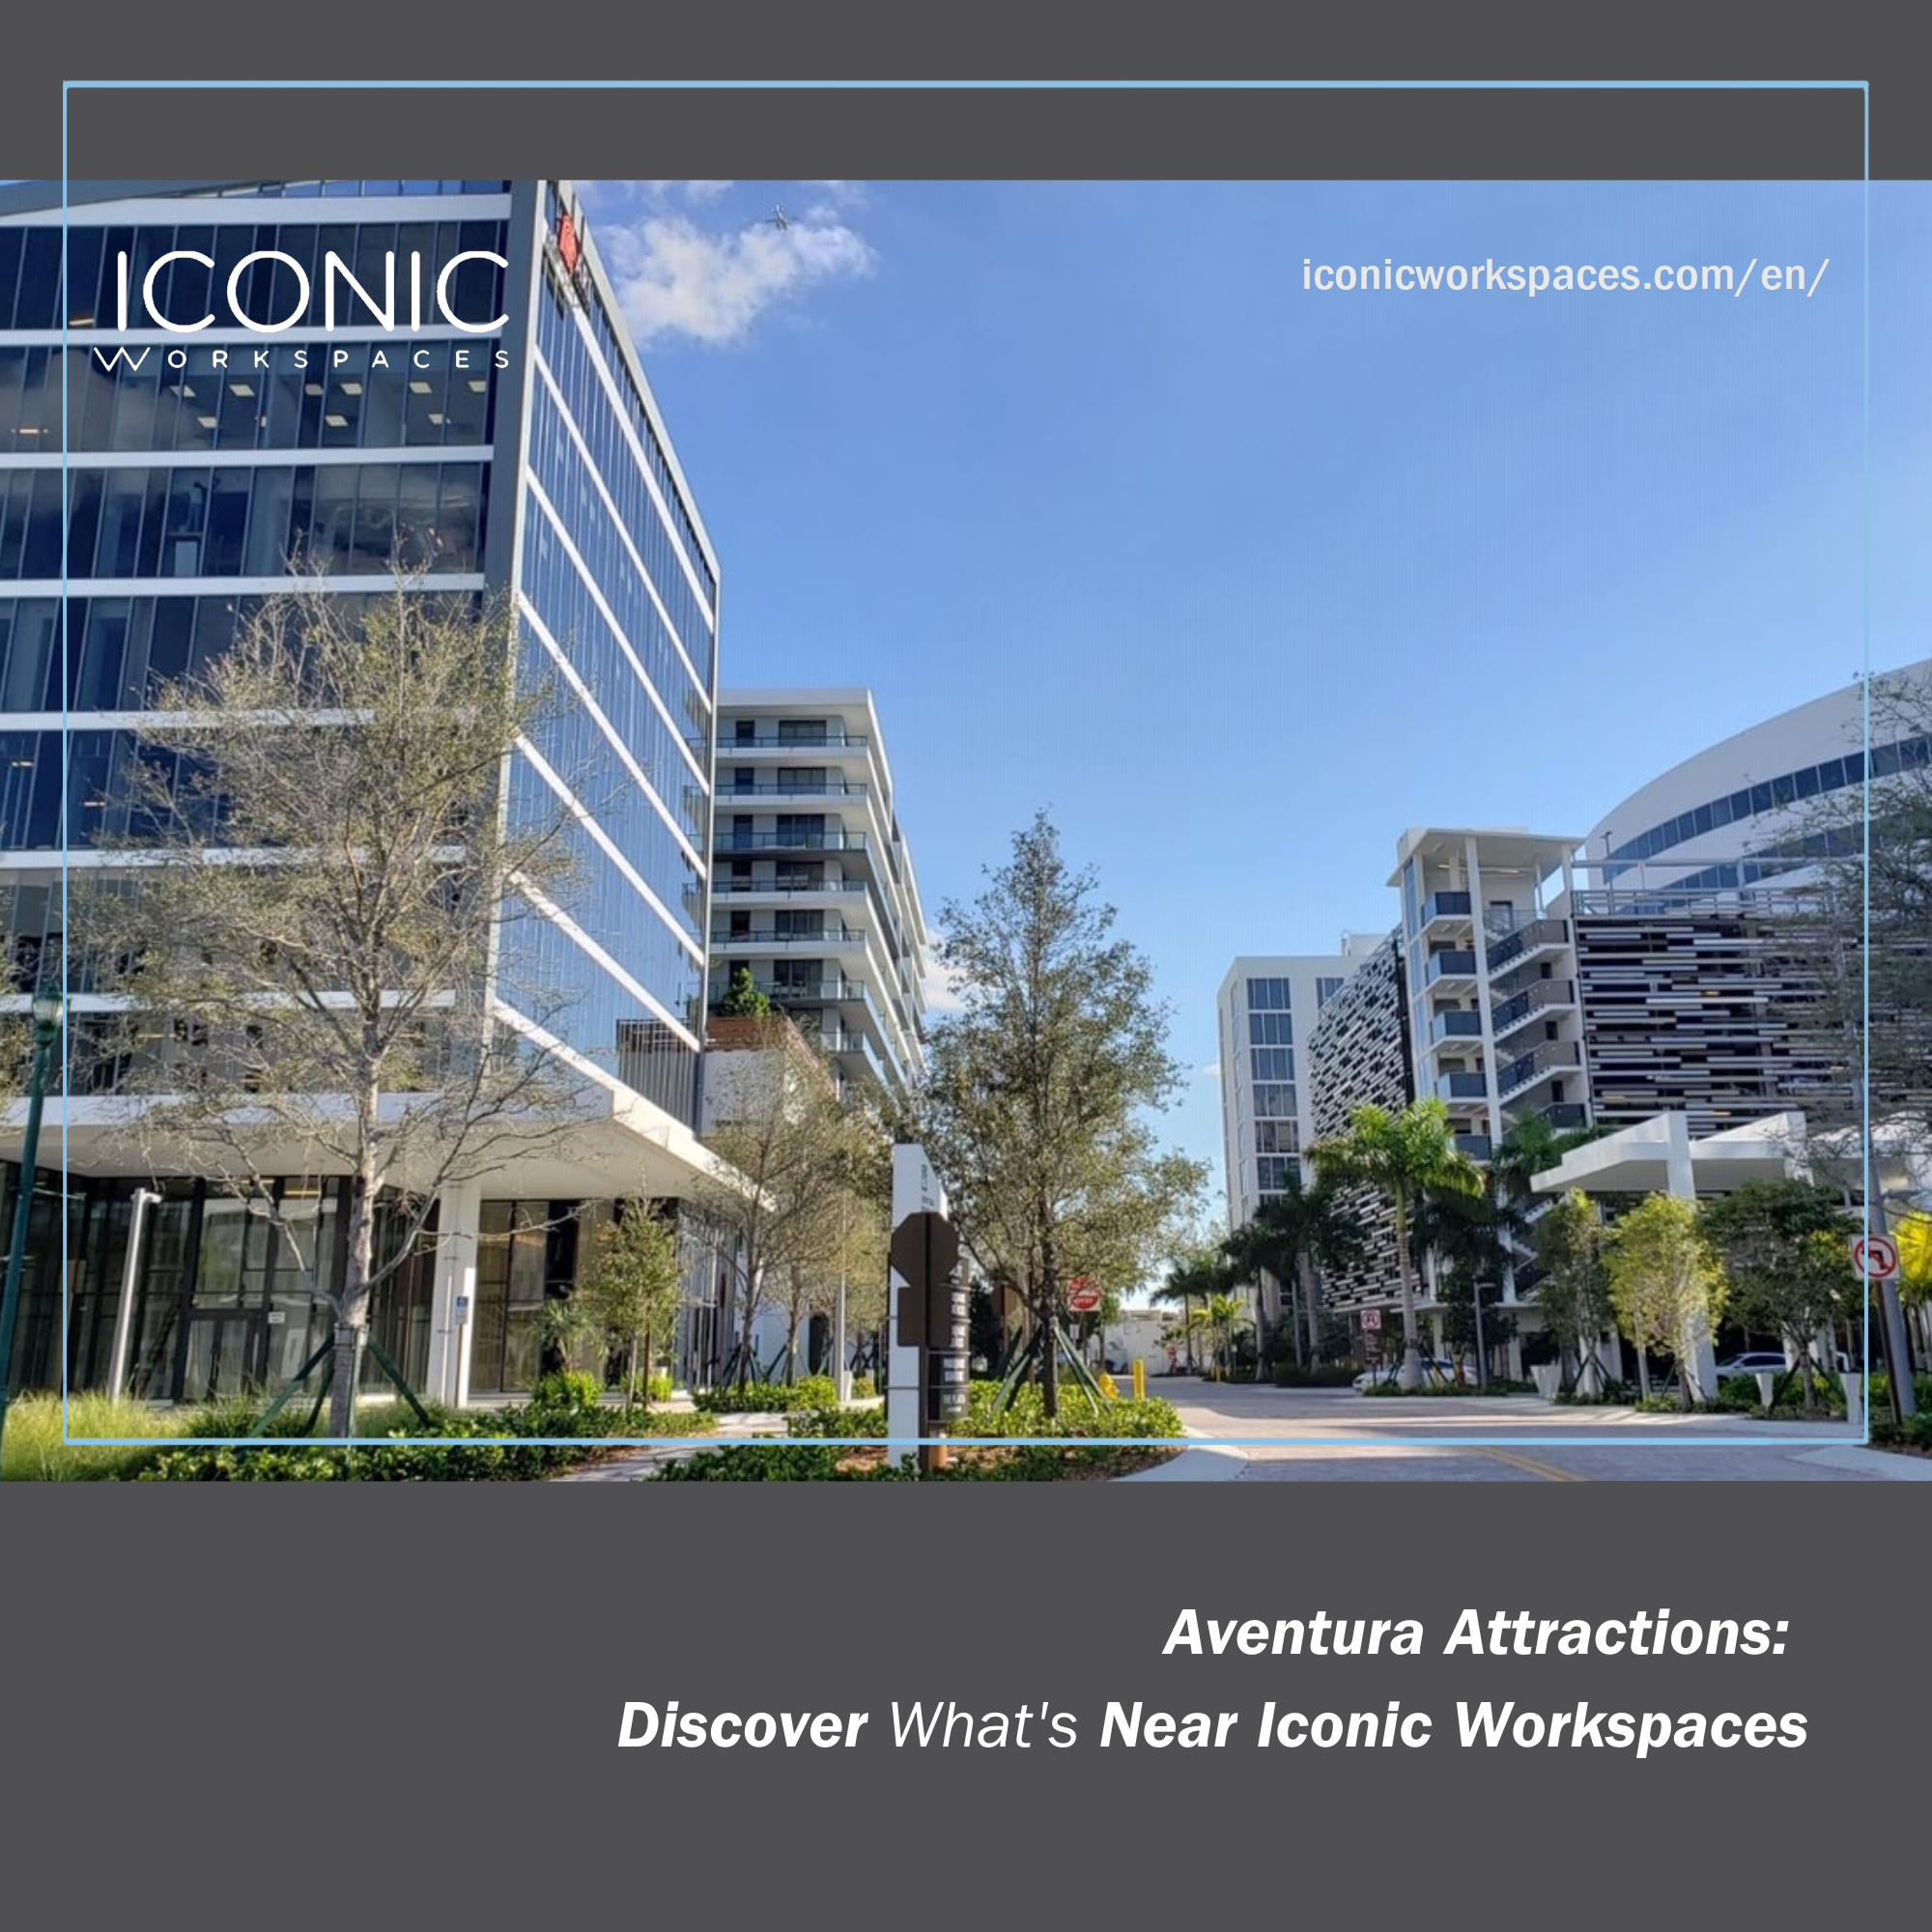 Aventura Attractions: Discover What's Near Iconic Workspaces